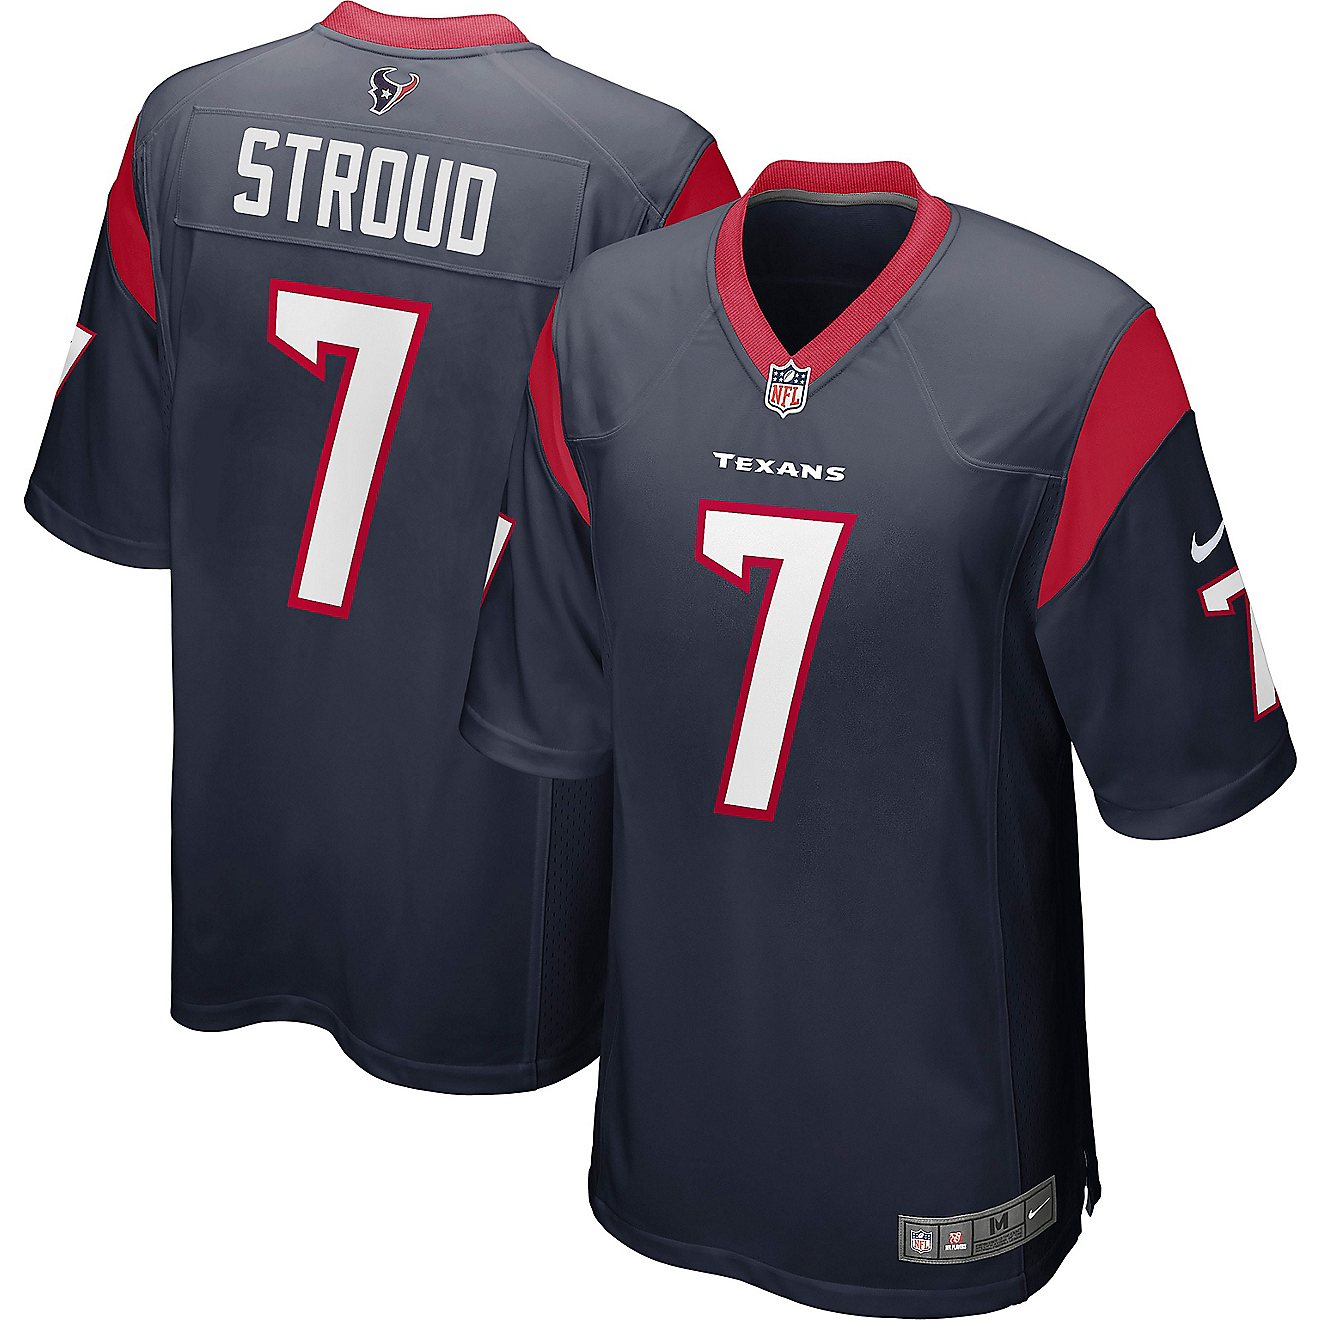 Nike Men's Houston Texans CJ Stroud 7 Home Game Jersey                                                                           - view number 3